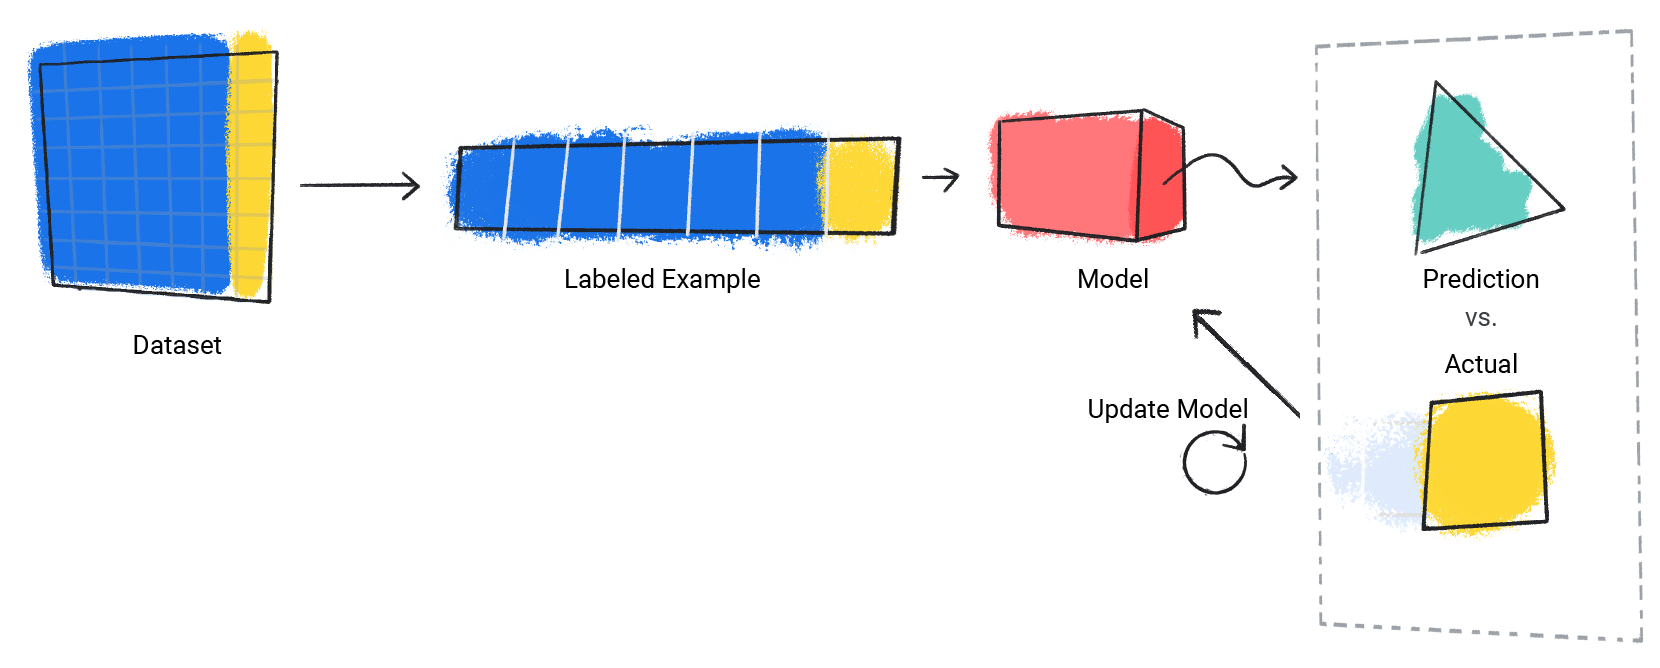 An image of a model repeating the process of its prediction versus the actual value.